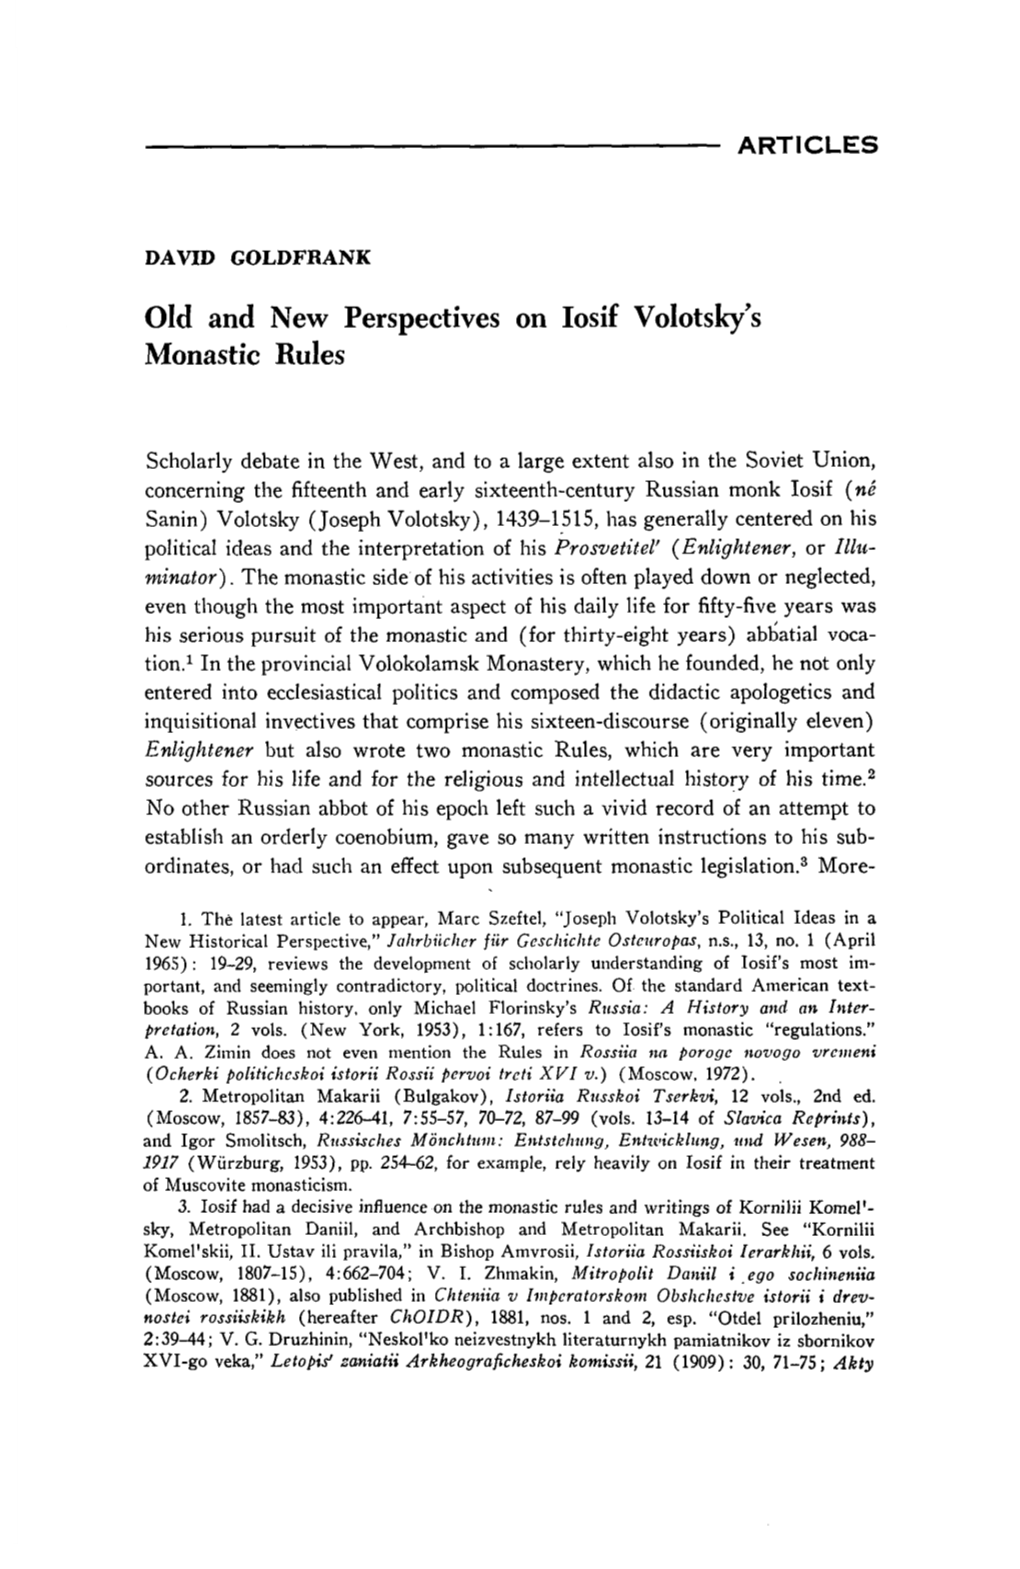 Old and New Perspectives on Losif Volotsky's Monastic Rules